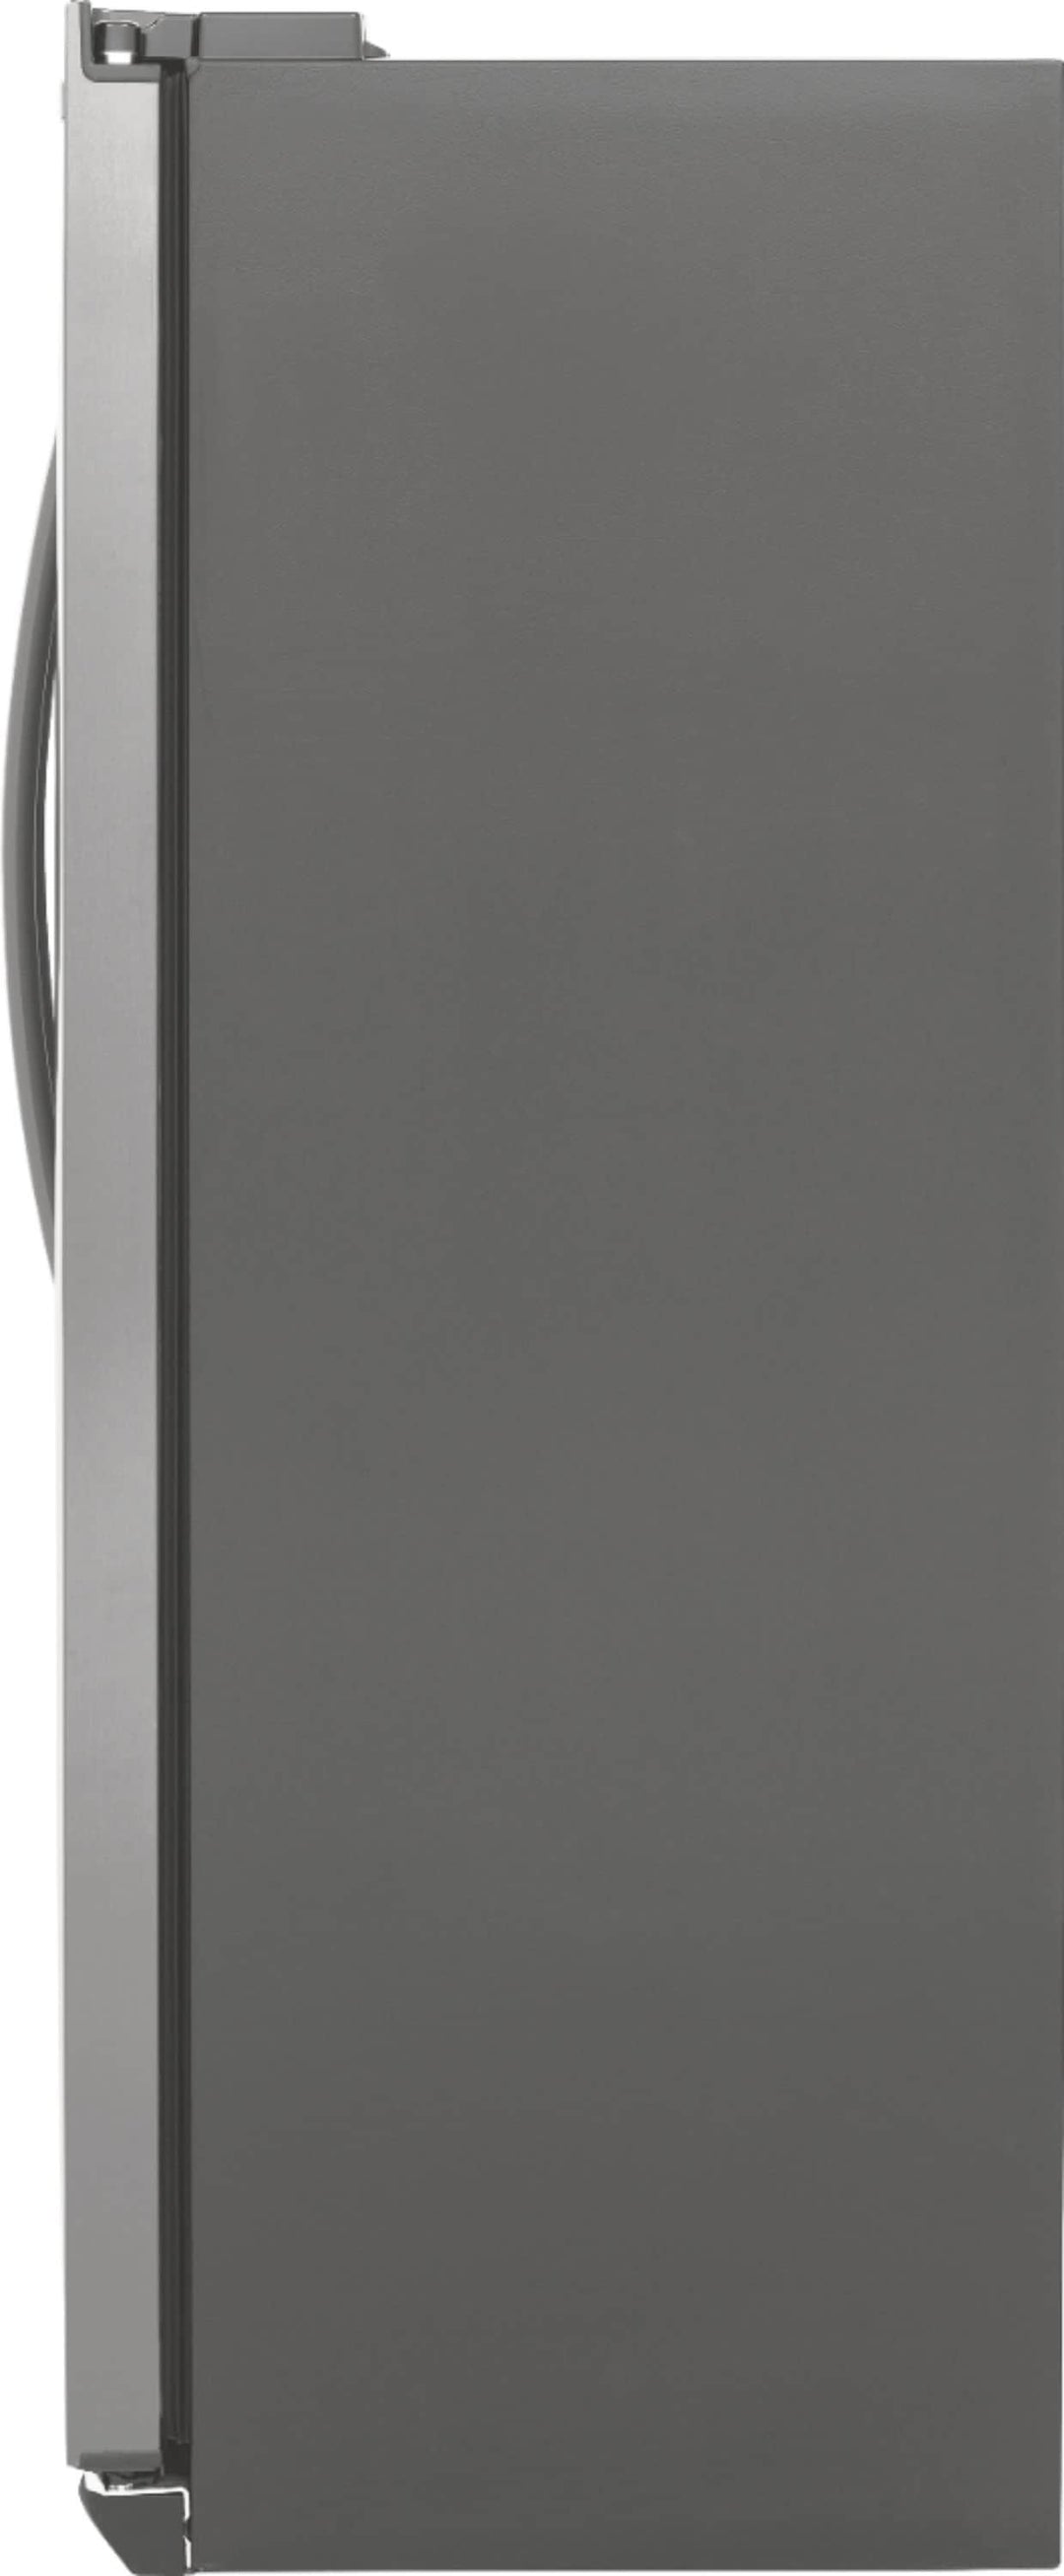 Frigidaire - Gallery 22.3 Cu. Ft. Side-by-Side Counter-Depth Refrigerator - Stainless steel_14